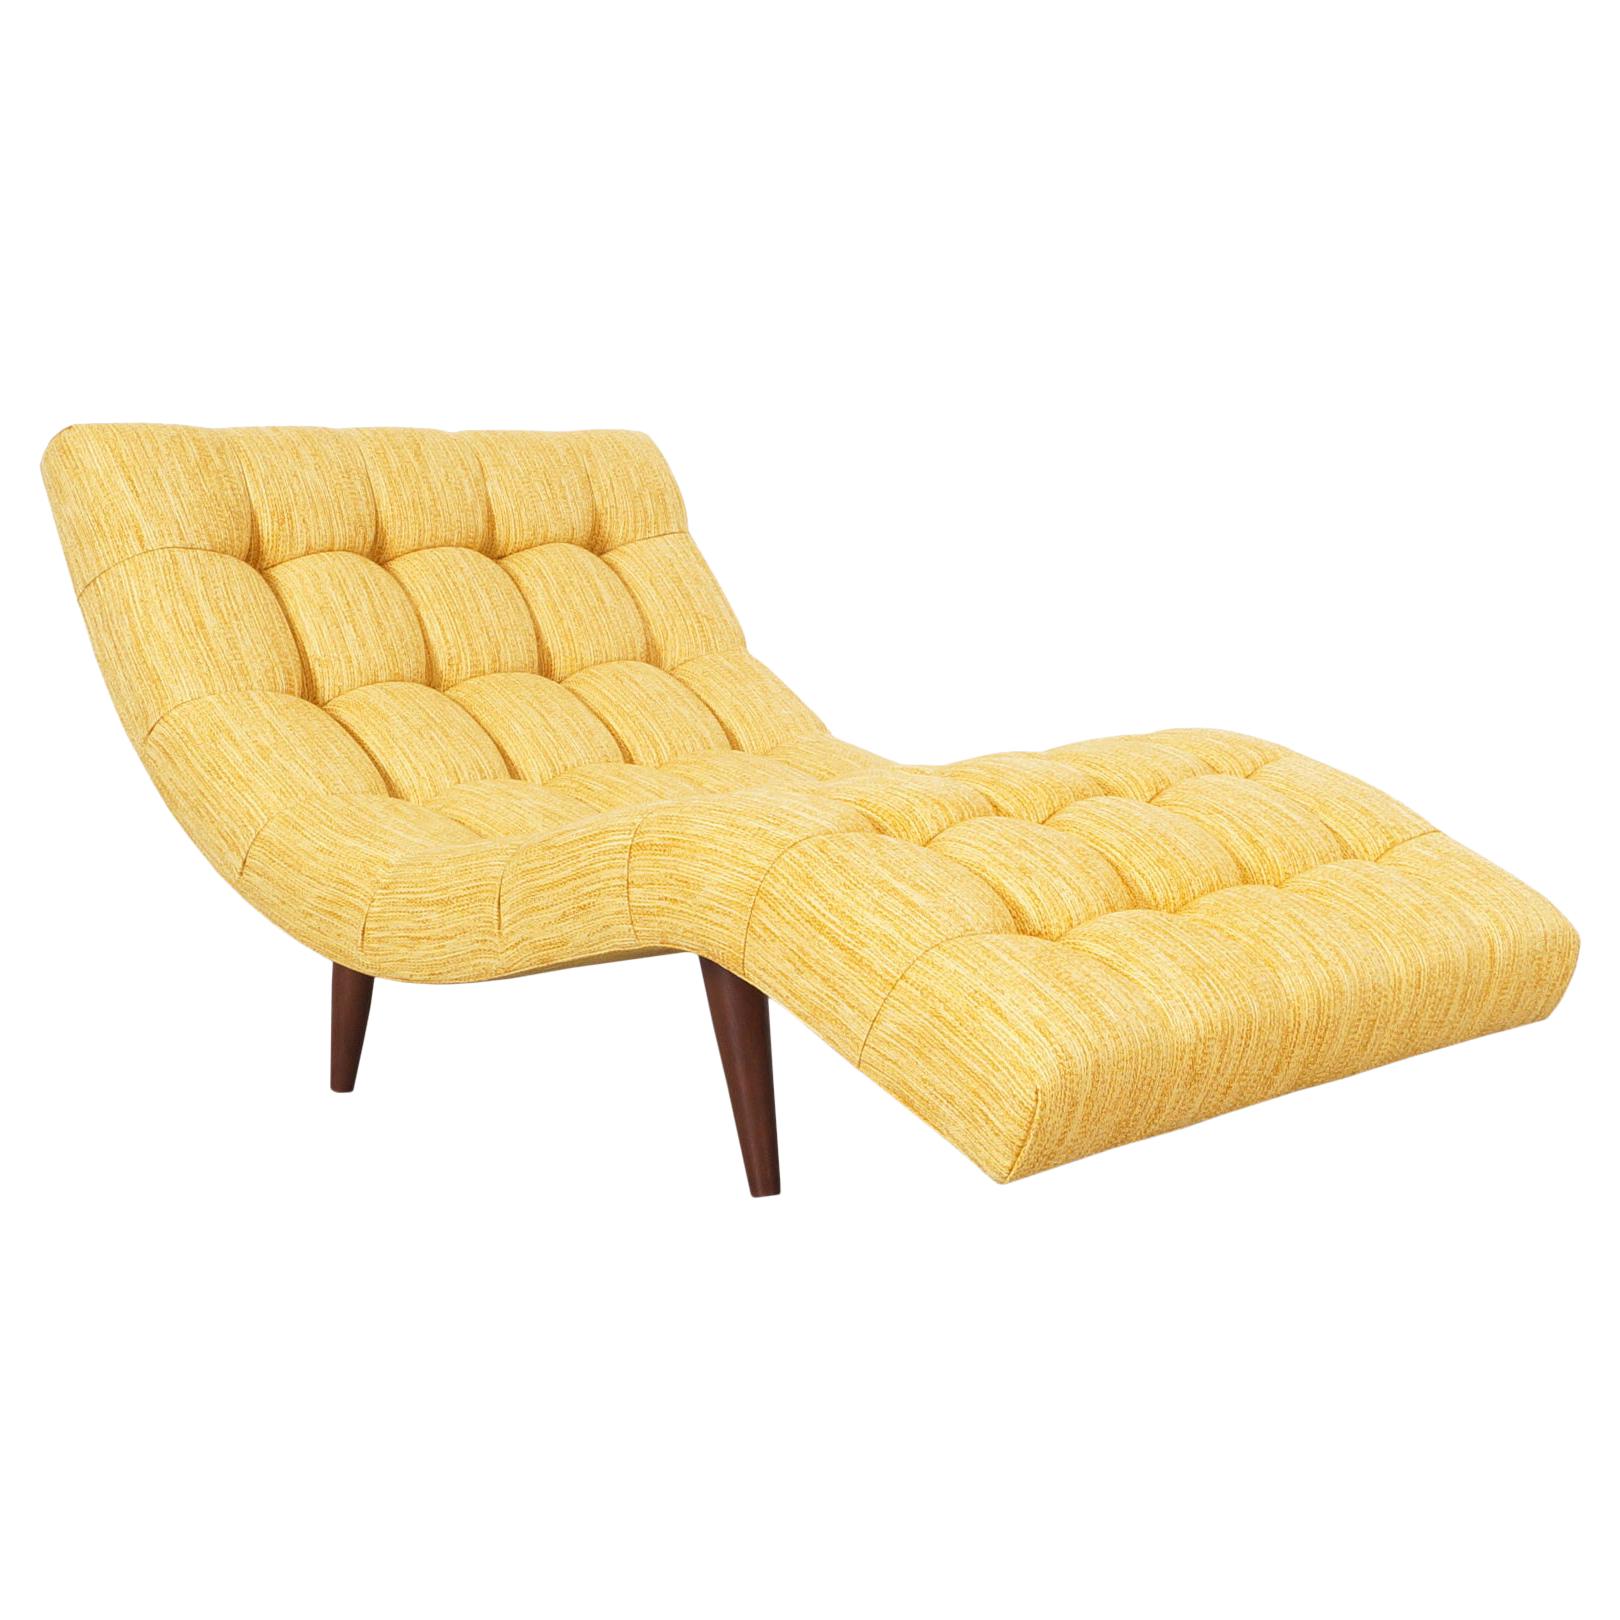 Mid Century "Wave" Chaise Lounge Chair by Adrian Pearsall